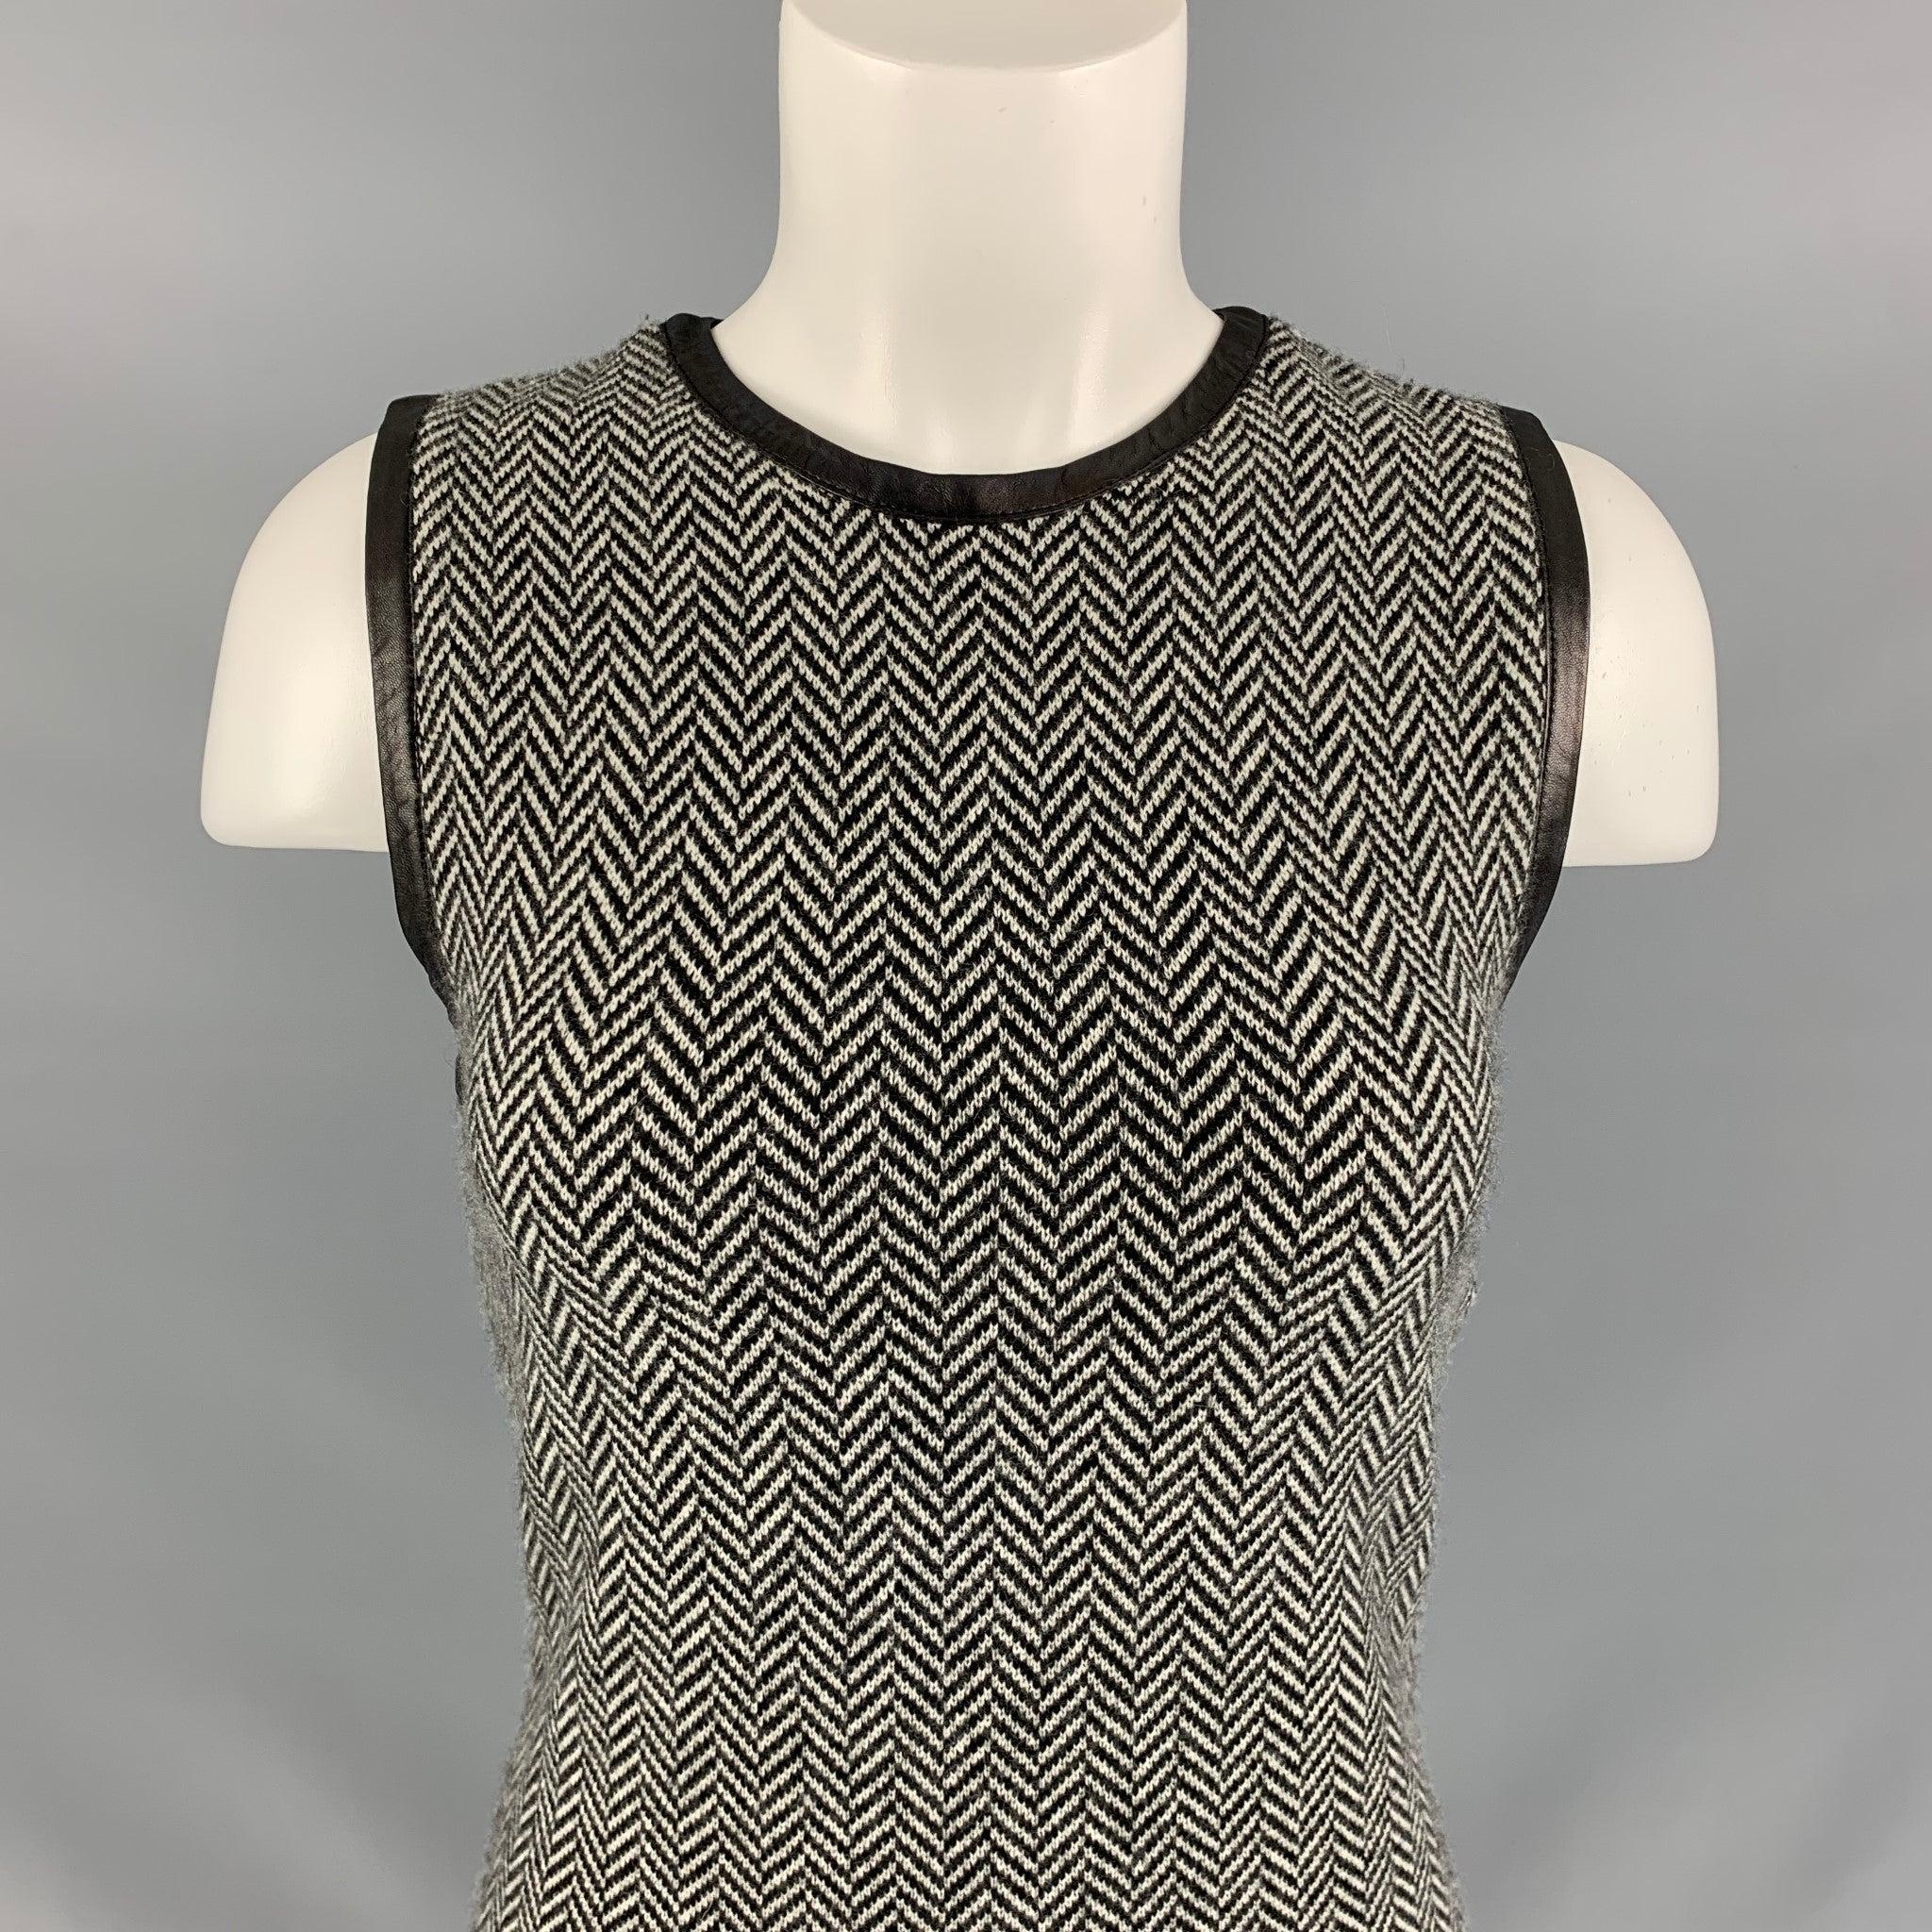 RALPH LAUREN Black Label below knee dress comes in a black and white cashmere, herringbone pattern and 1/4 invisible zipper closure at center back featuring a leather trim detail.
Very Good Pre-Owned Condition. 

Marked:   M 

Measurements: 
